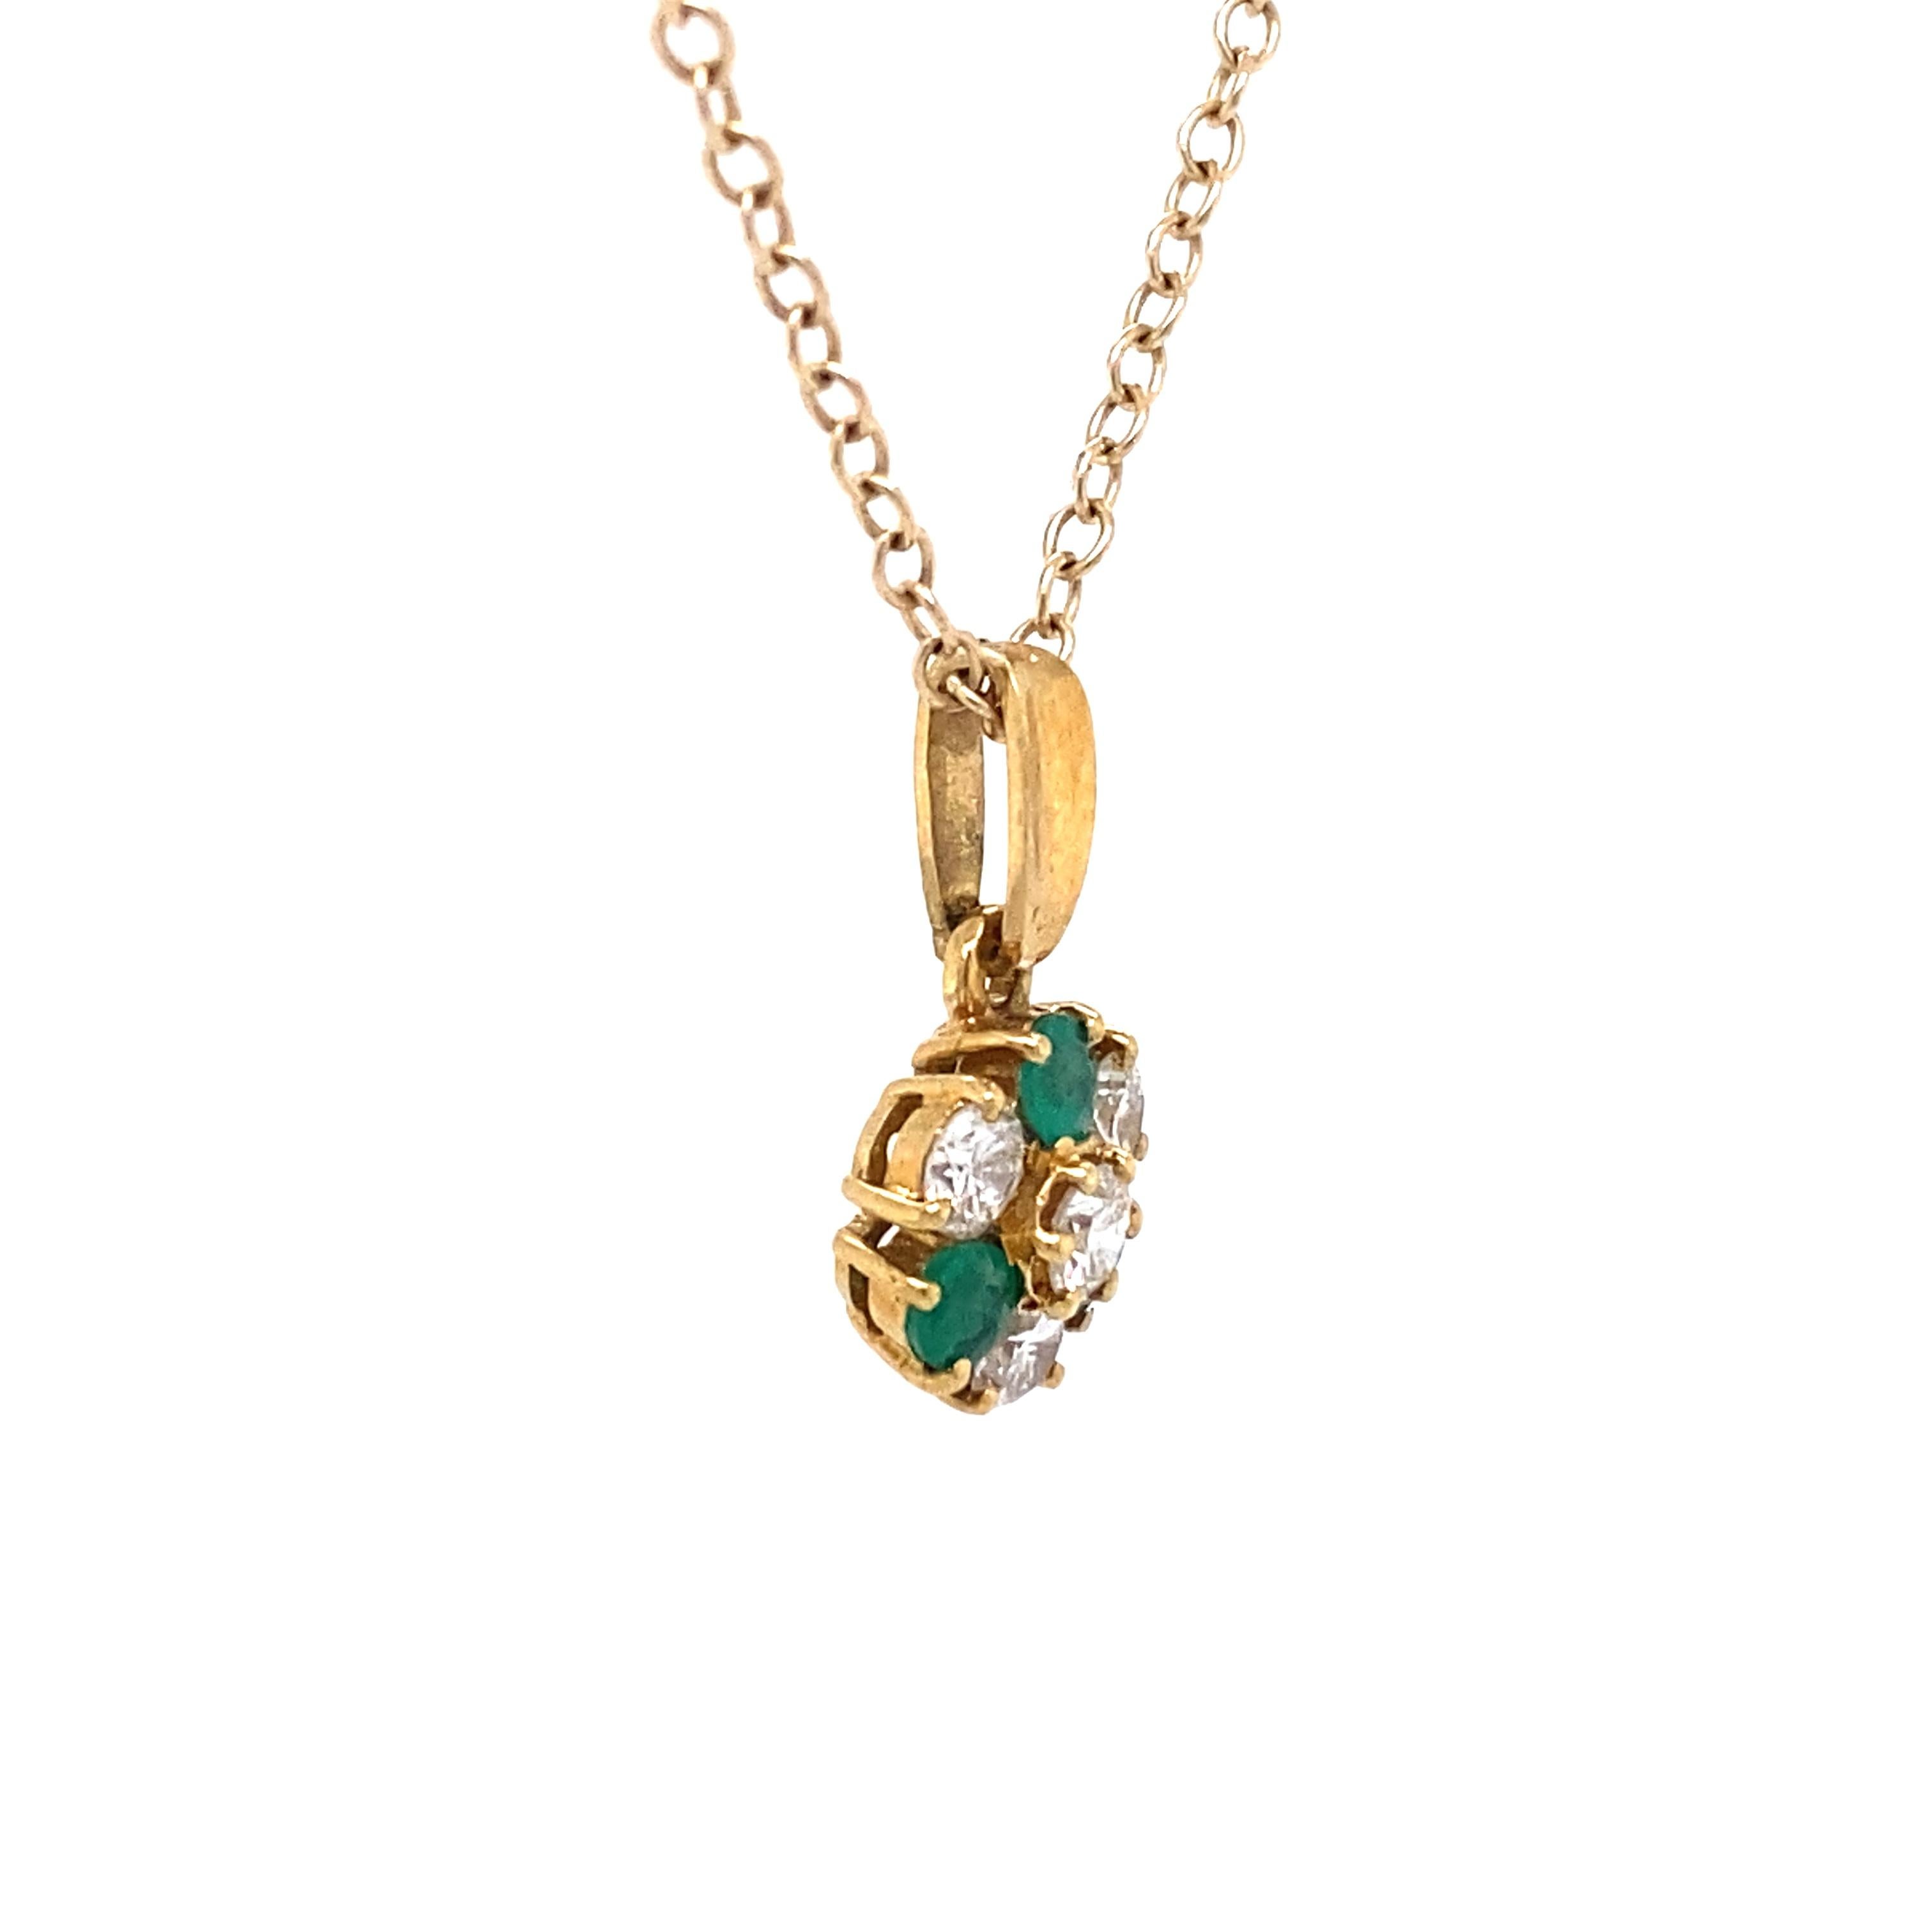 Chain not included.

Circa: 1970s
Metal Type: 18 Karat Yellow Gold 
Weight: 1.5 grams
Dimensions: 0.5in Length including bail

Diamond Details:
Carat: 0.50 carat total weight
Cut: Round
Color: G 
Clarity: VS

Emerald Details:
Cut: Round
Origin: